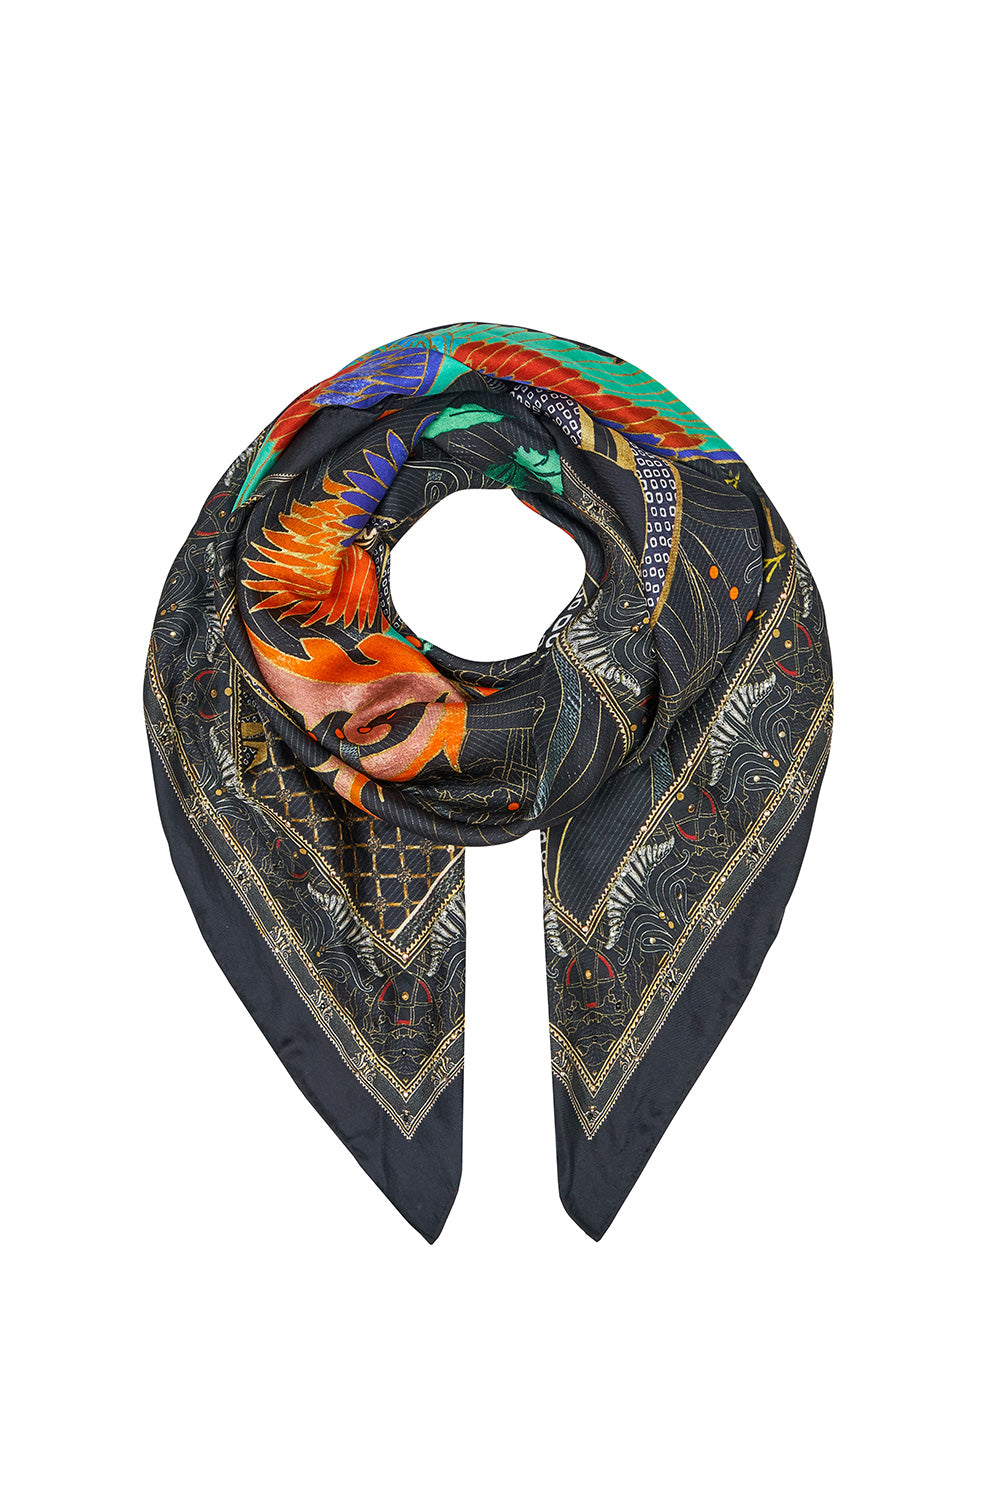 LARGE SQUARE SCARF WISE WINGS